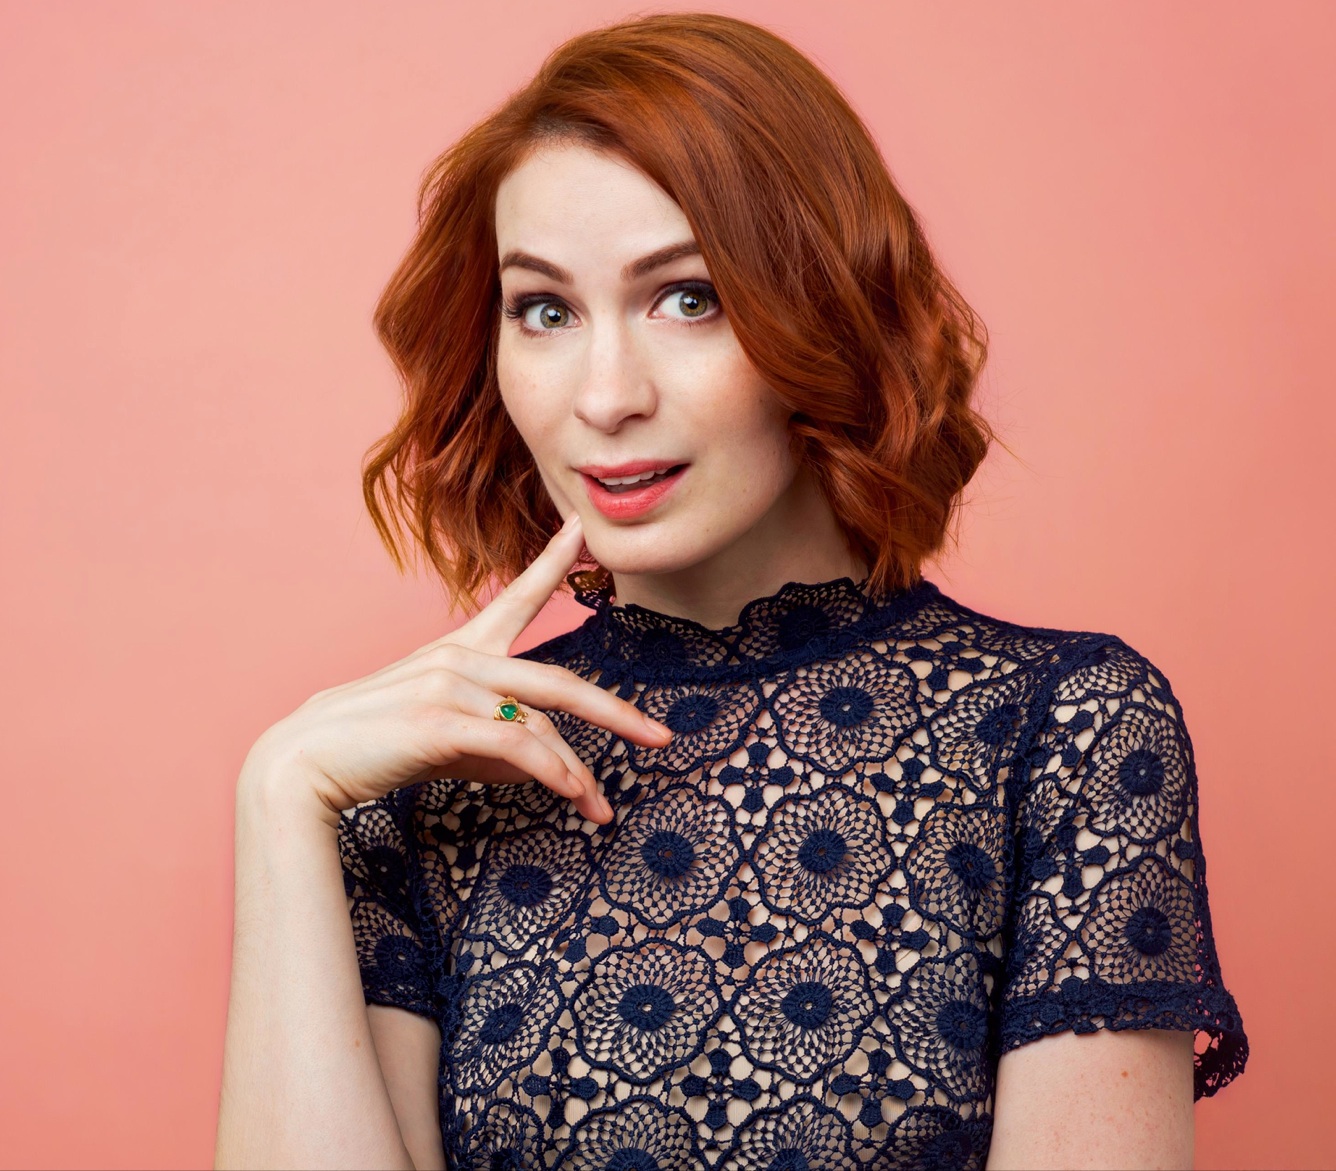 Nice Images Collection: Felicia Day Desktop Wallpapers